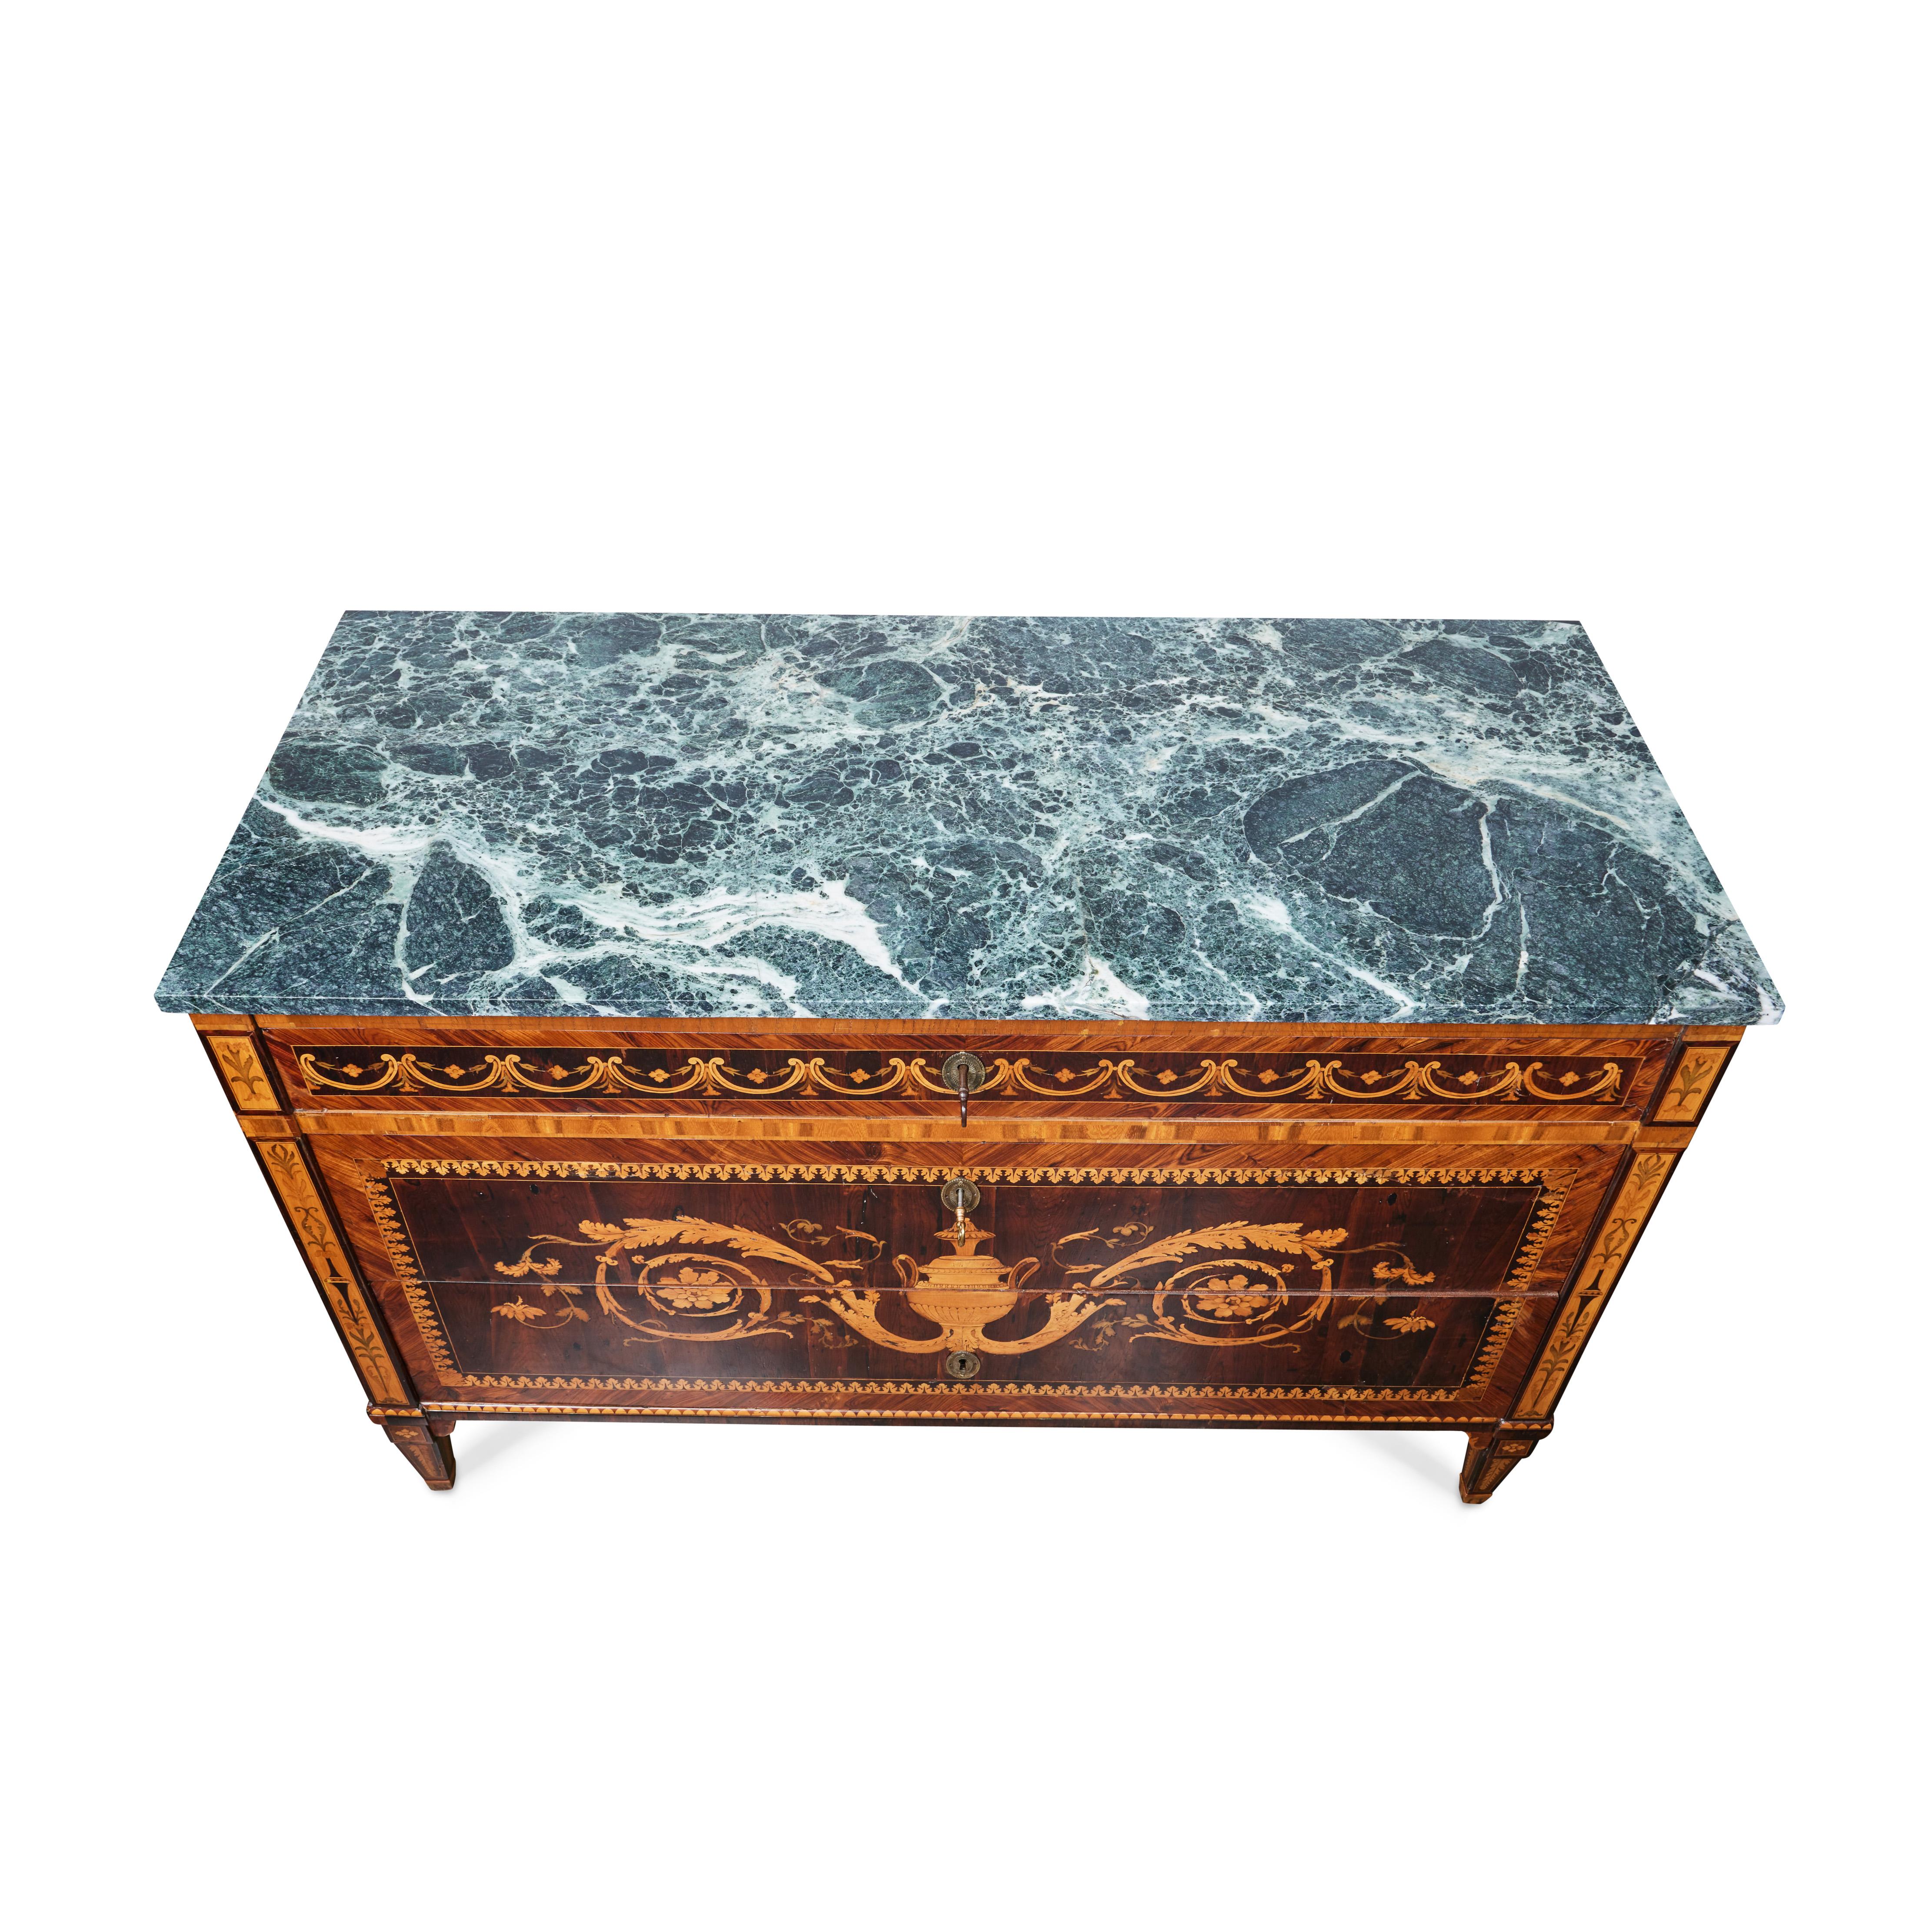 Fine pair of veneered and inlaid commodes in various woods with original marble tops. The fronts are centered by a neoclassical vase with floral bouquets, bordered with leaves. 

Attributed to furniture designer Giuseppe Maggiolini (Parabiago,